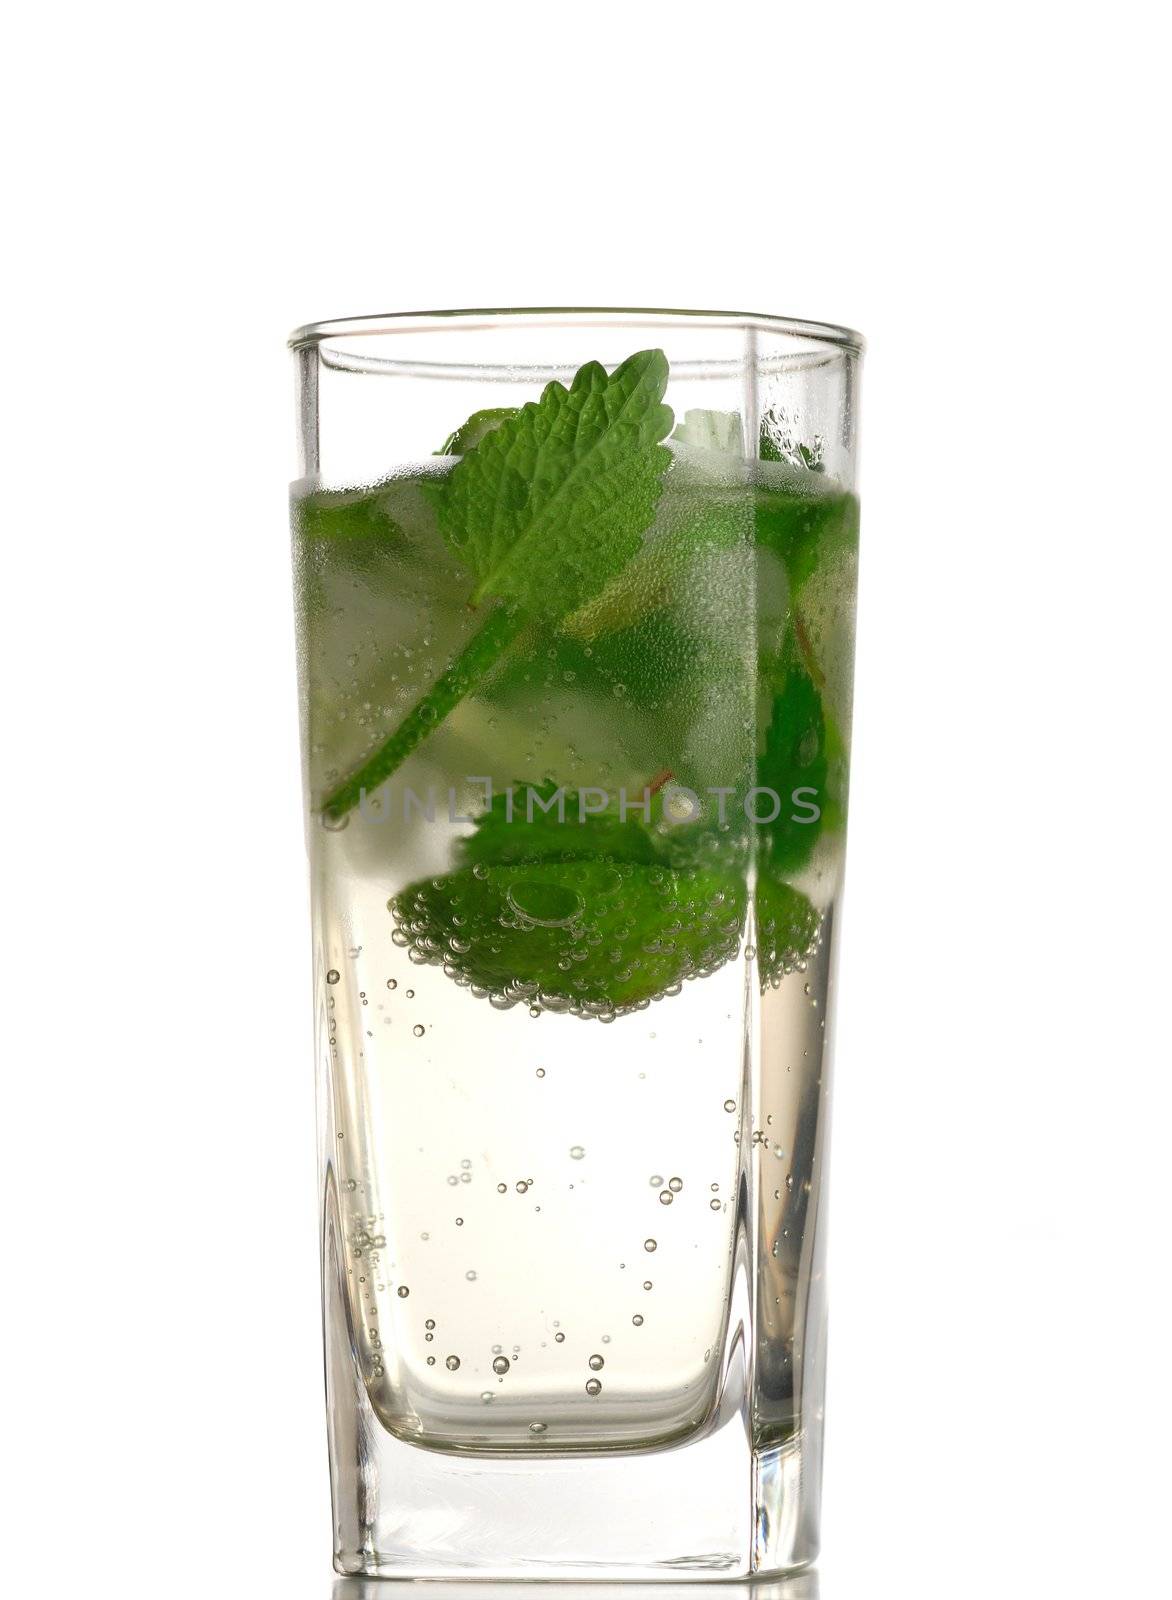 Mojito by haveseen